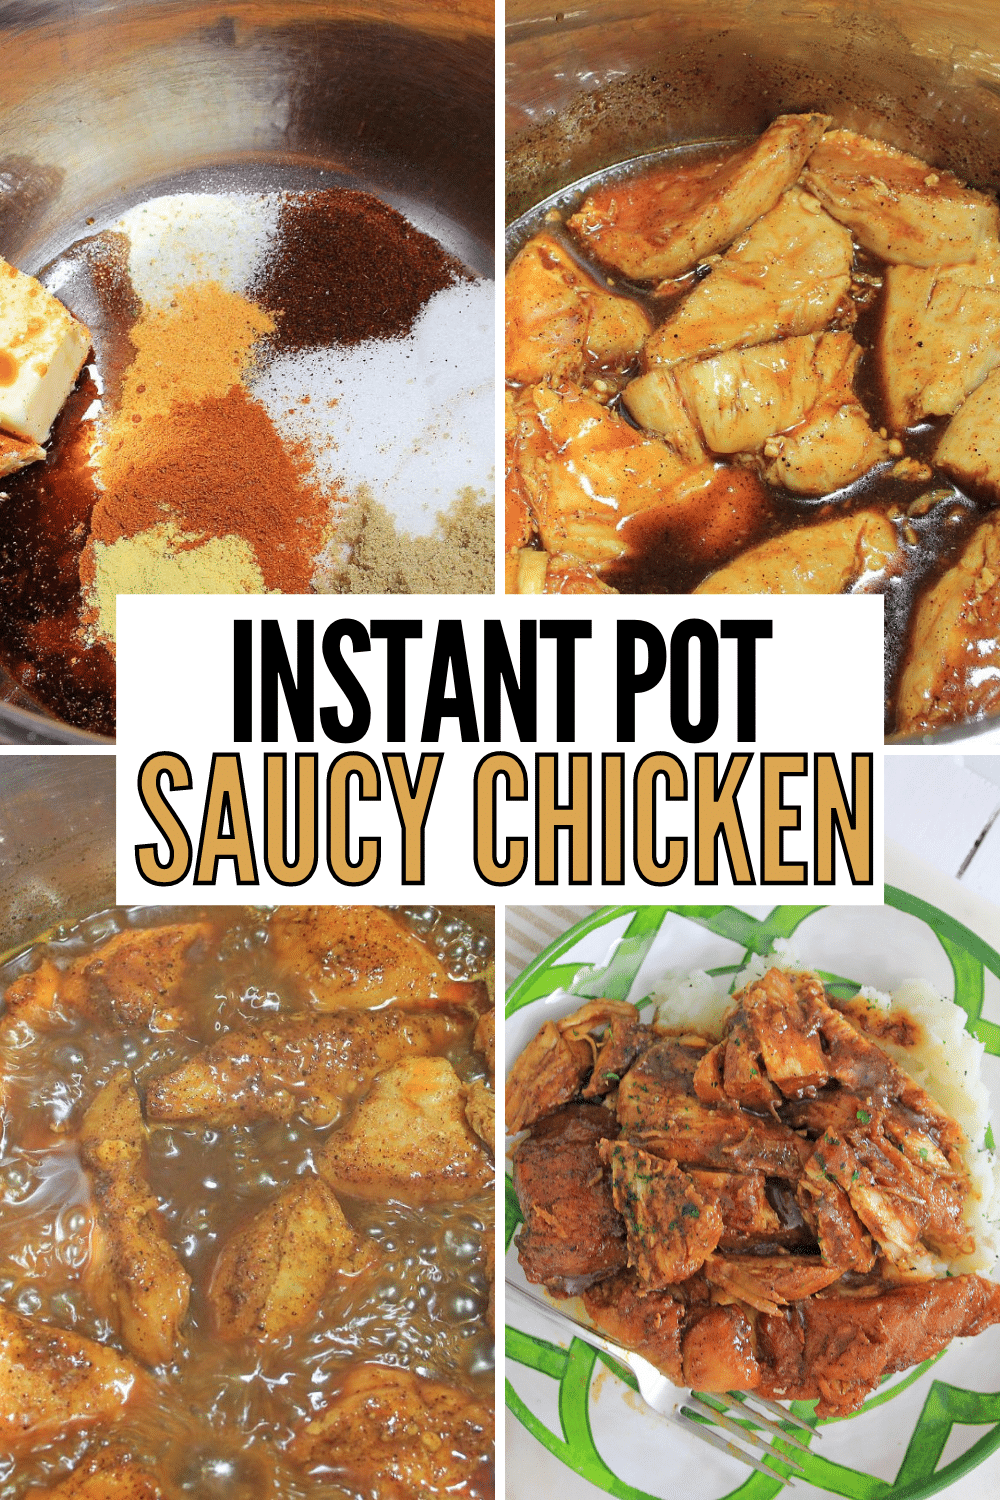 Instant Pot Saucy Chicken is tender and flavorful chicken breasts that cook in just one pot. One pot meals mean an easy cleanup! #instantpot #pressurecooker #saucychicken #chicken #onepotmeal via @wondermomwannab